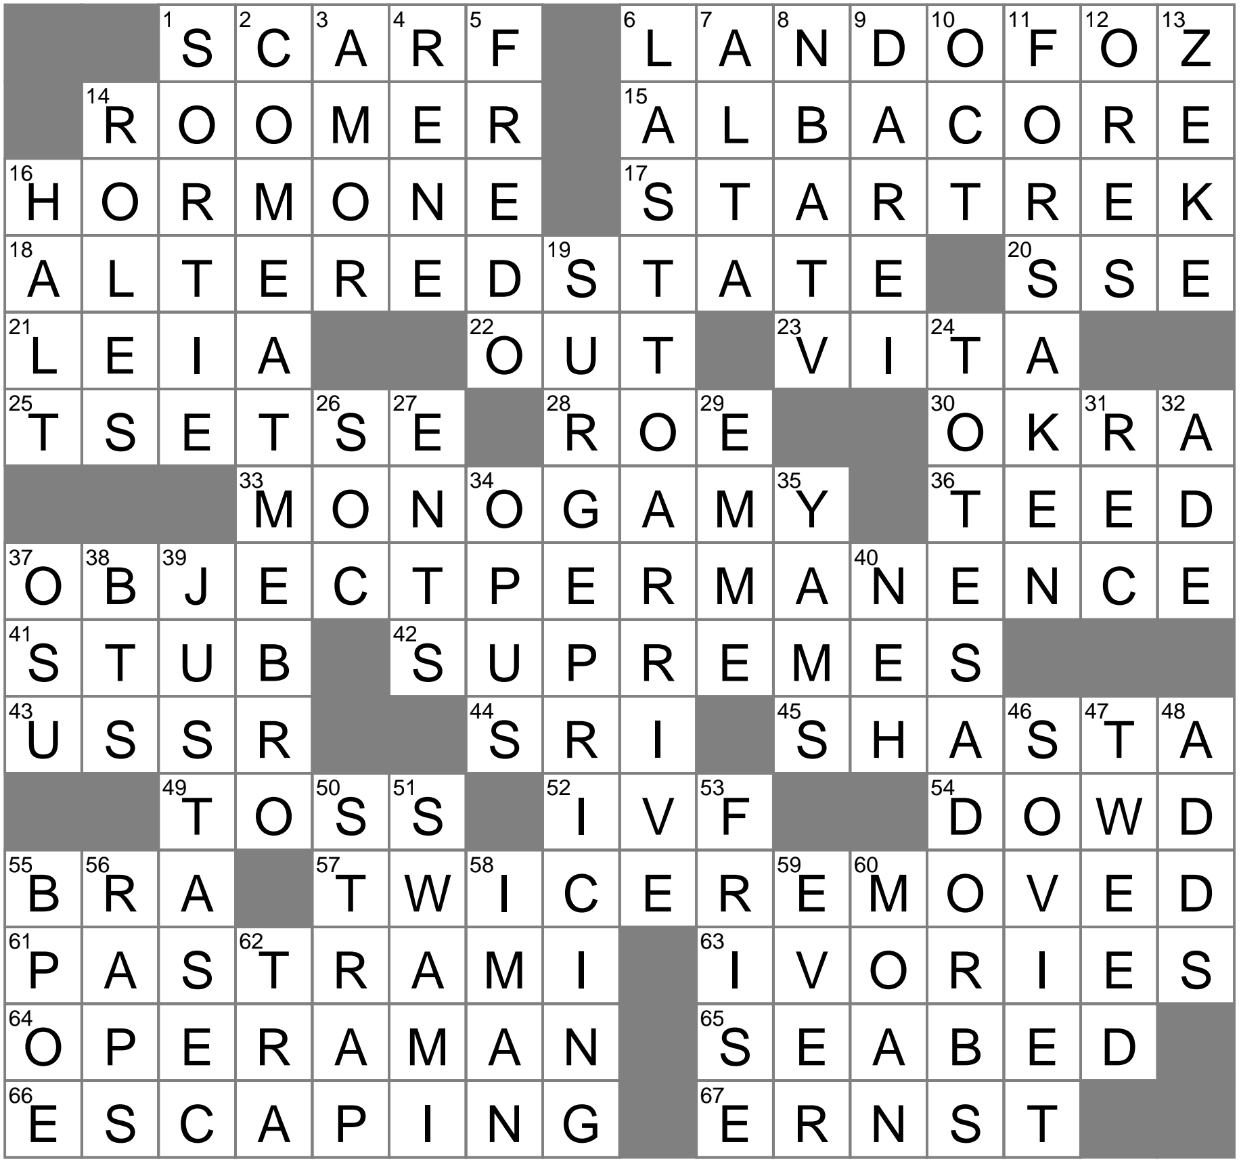 A Brief History of Bras in Crosswords - The New York Times